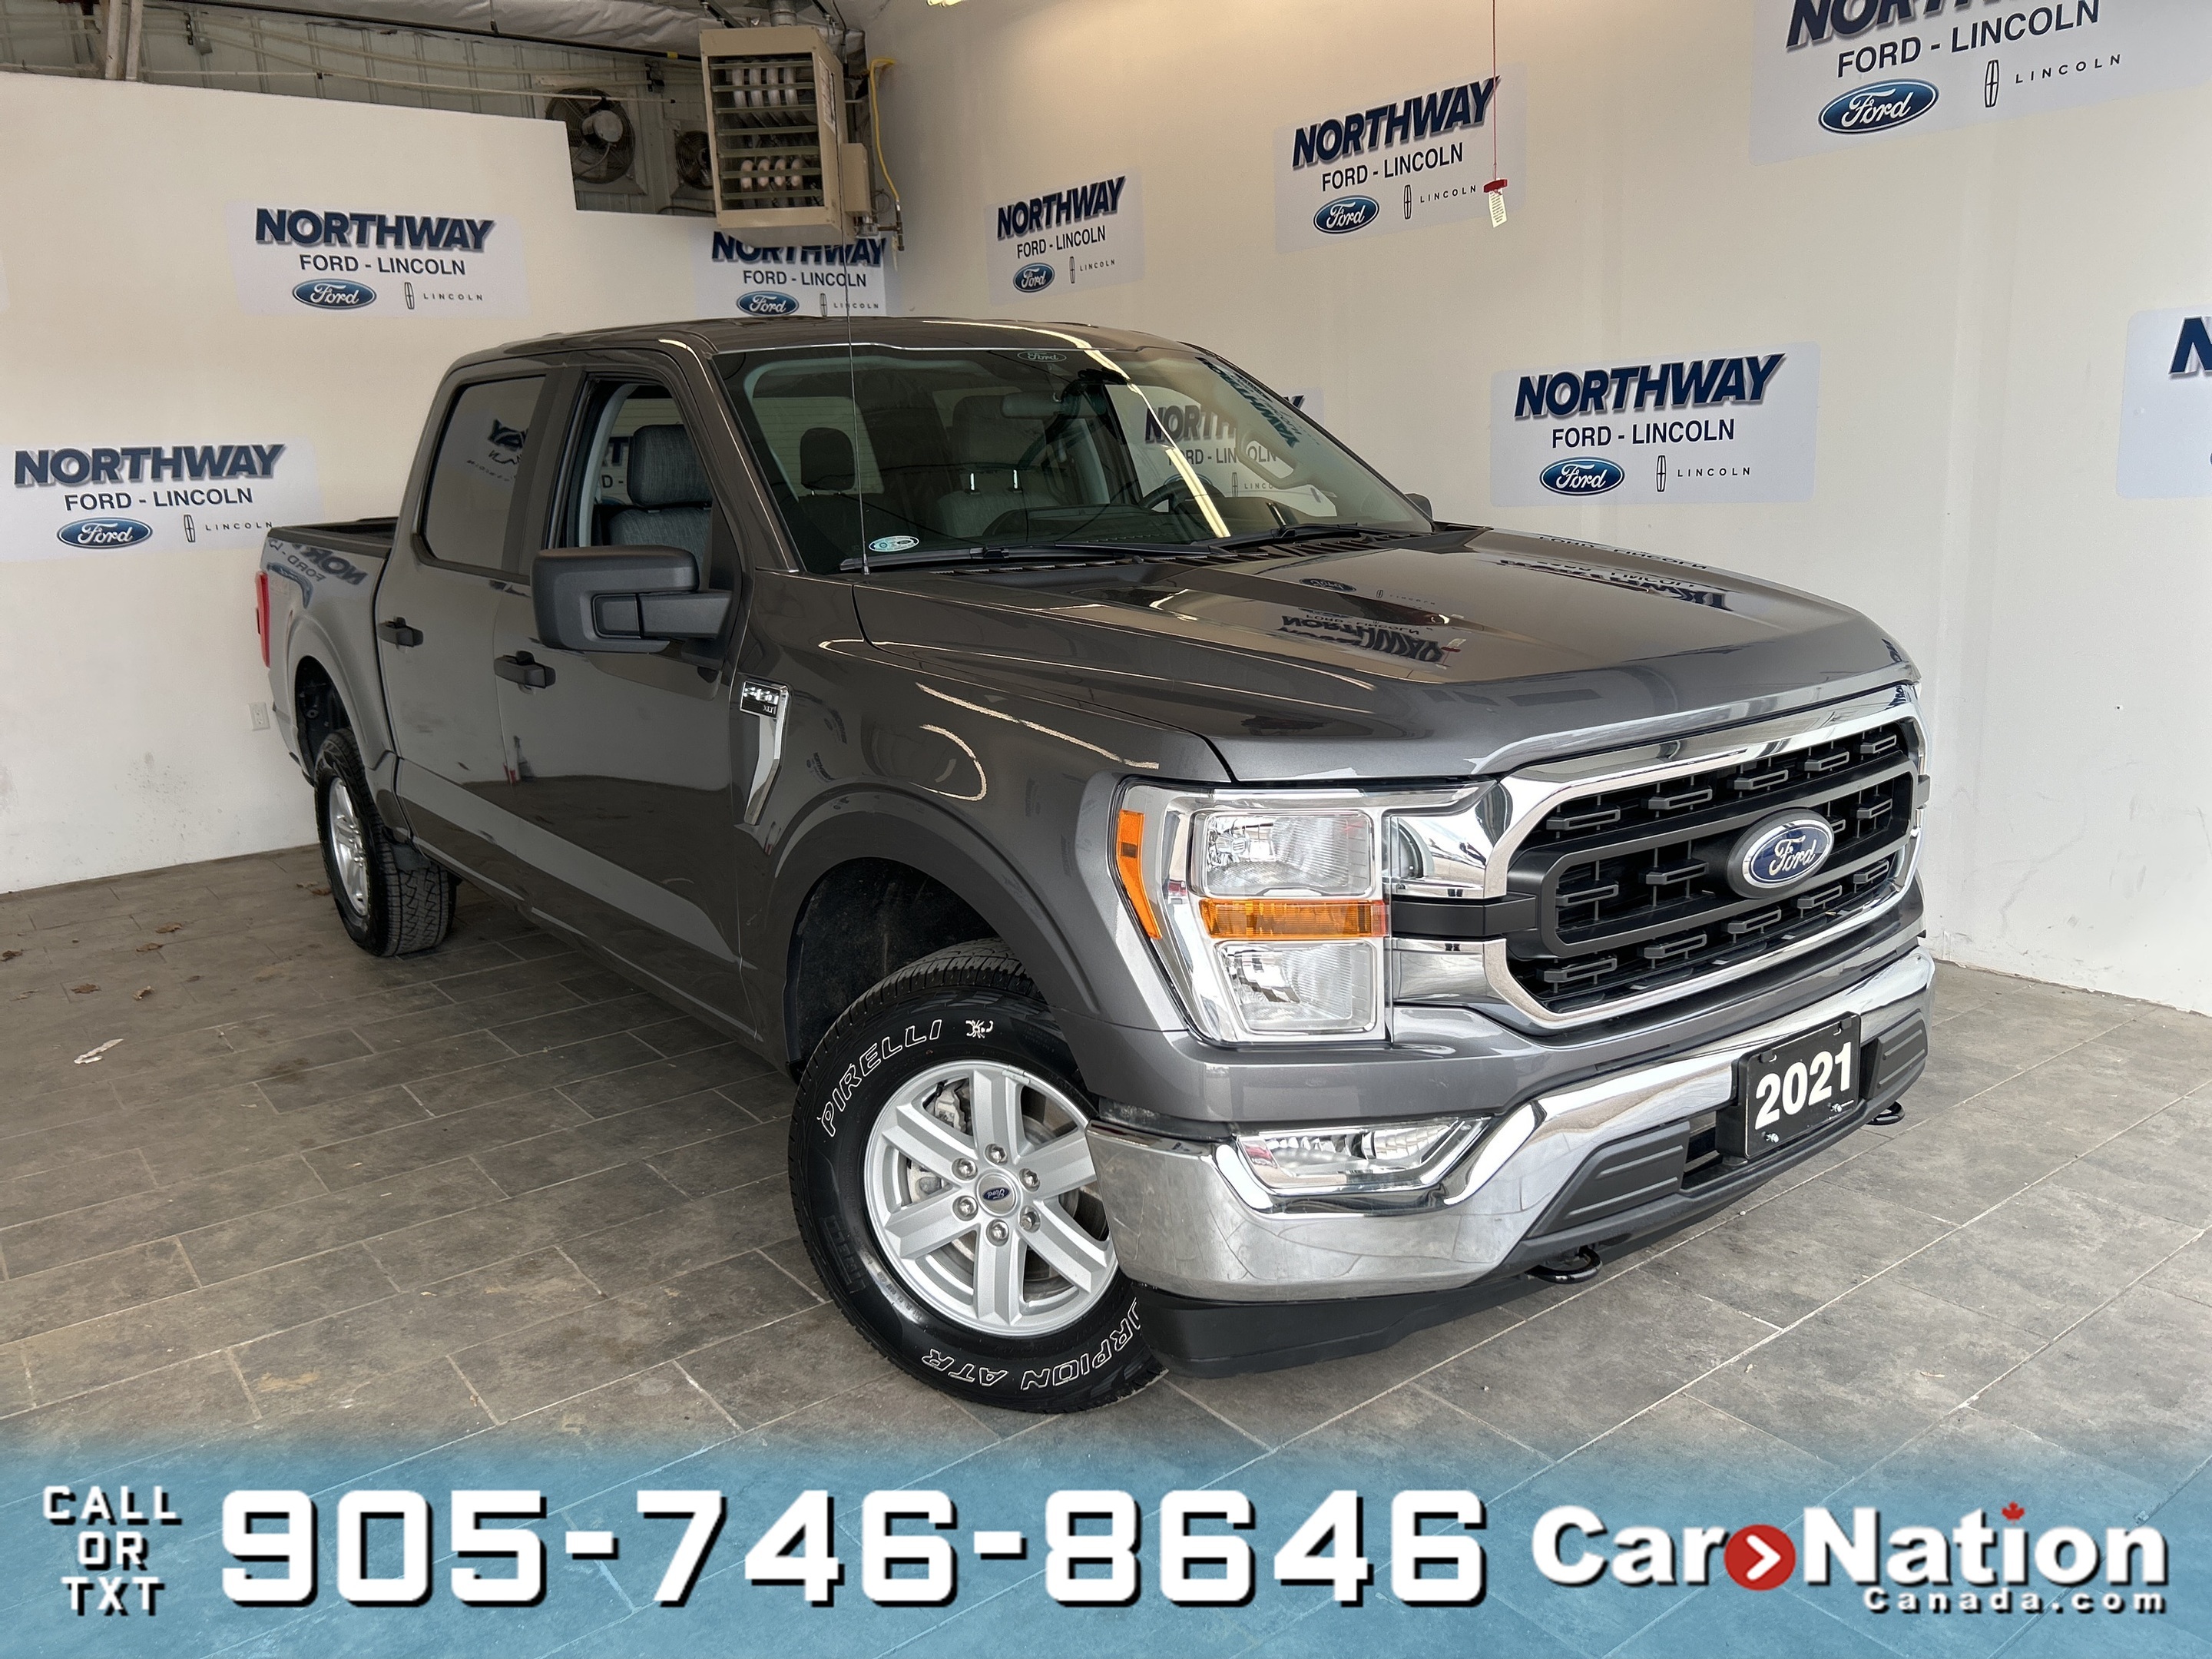 2021 Ford F-150 XLT | 4X4 | CREW CAB | TOUCHSCREEN | NEW CAR TRADE